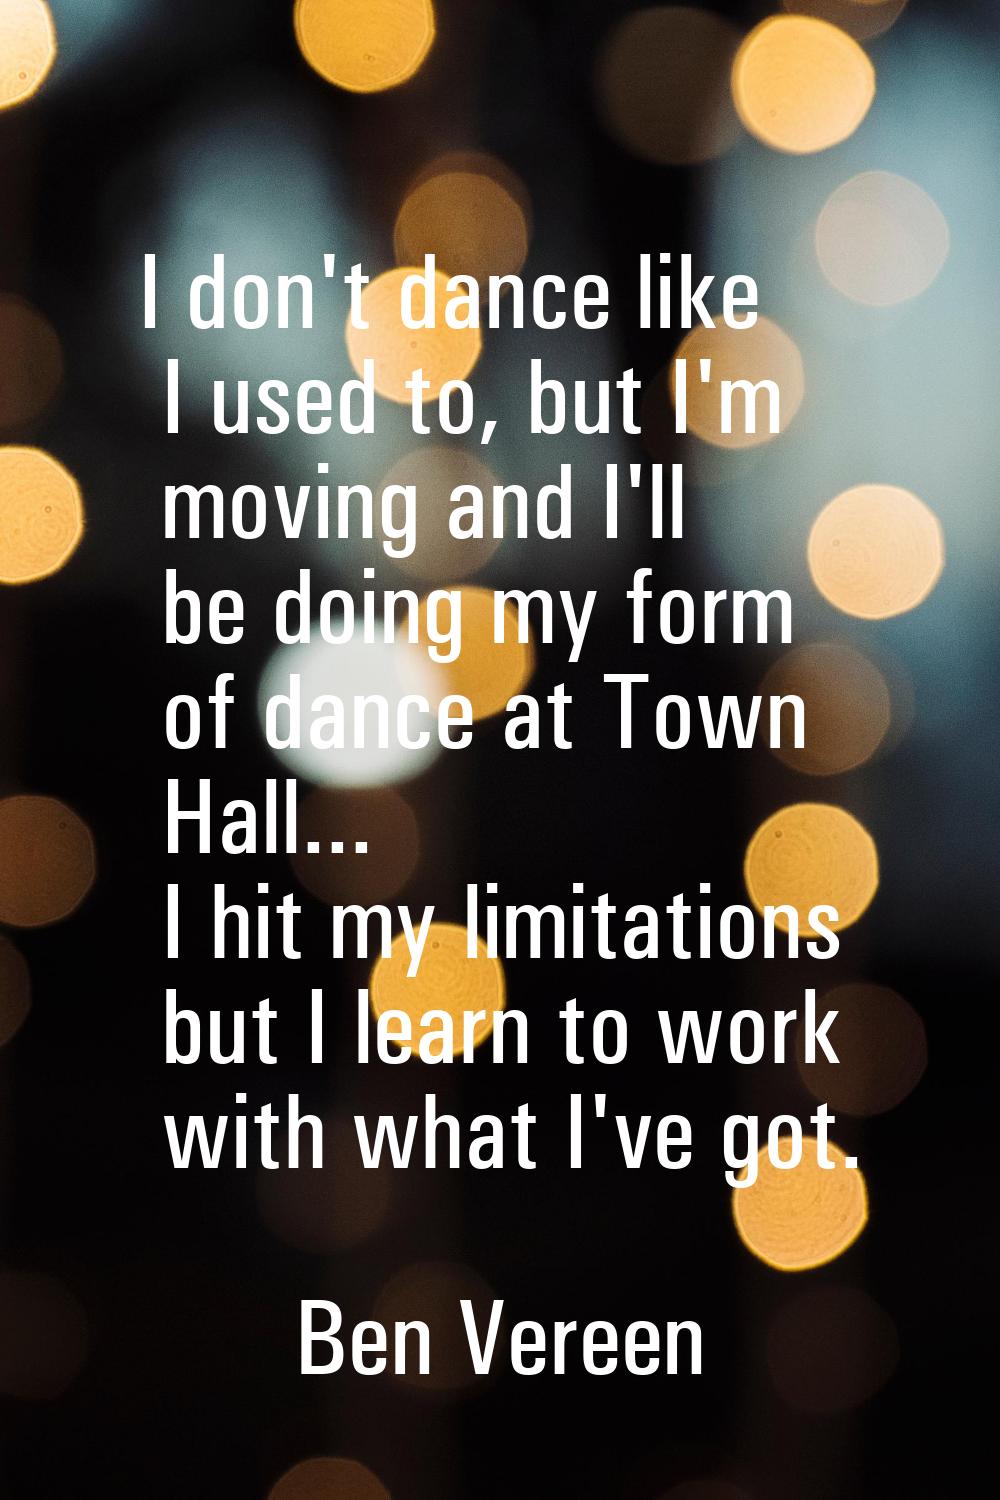 I don't dance like I used to, but I'm moving and I'll be doing my form of dance at Town Hall... I h